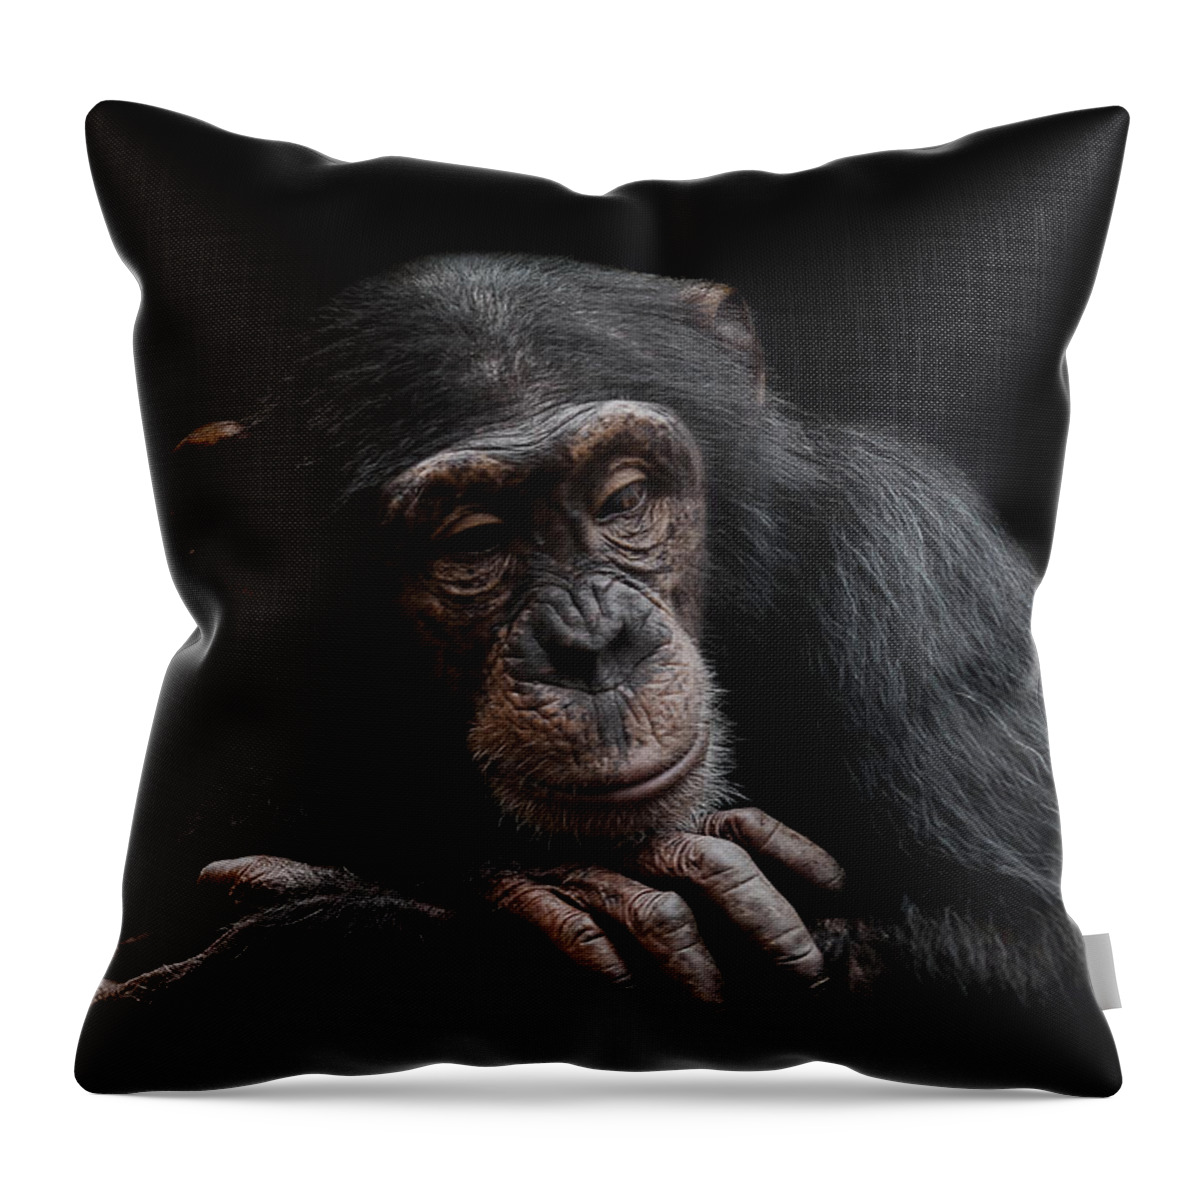 Chimpanzee Throw Pillow featuring the photograph Depression by Paul Neville